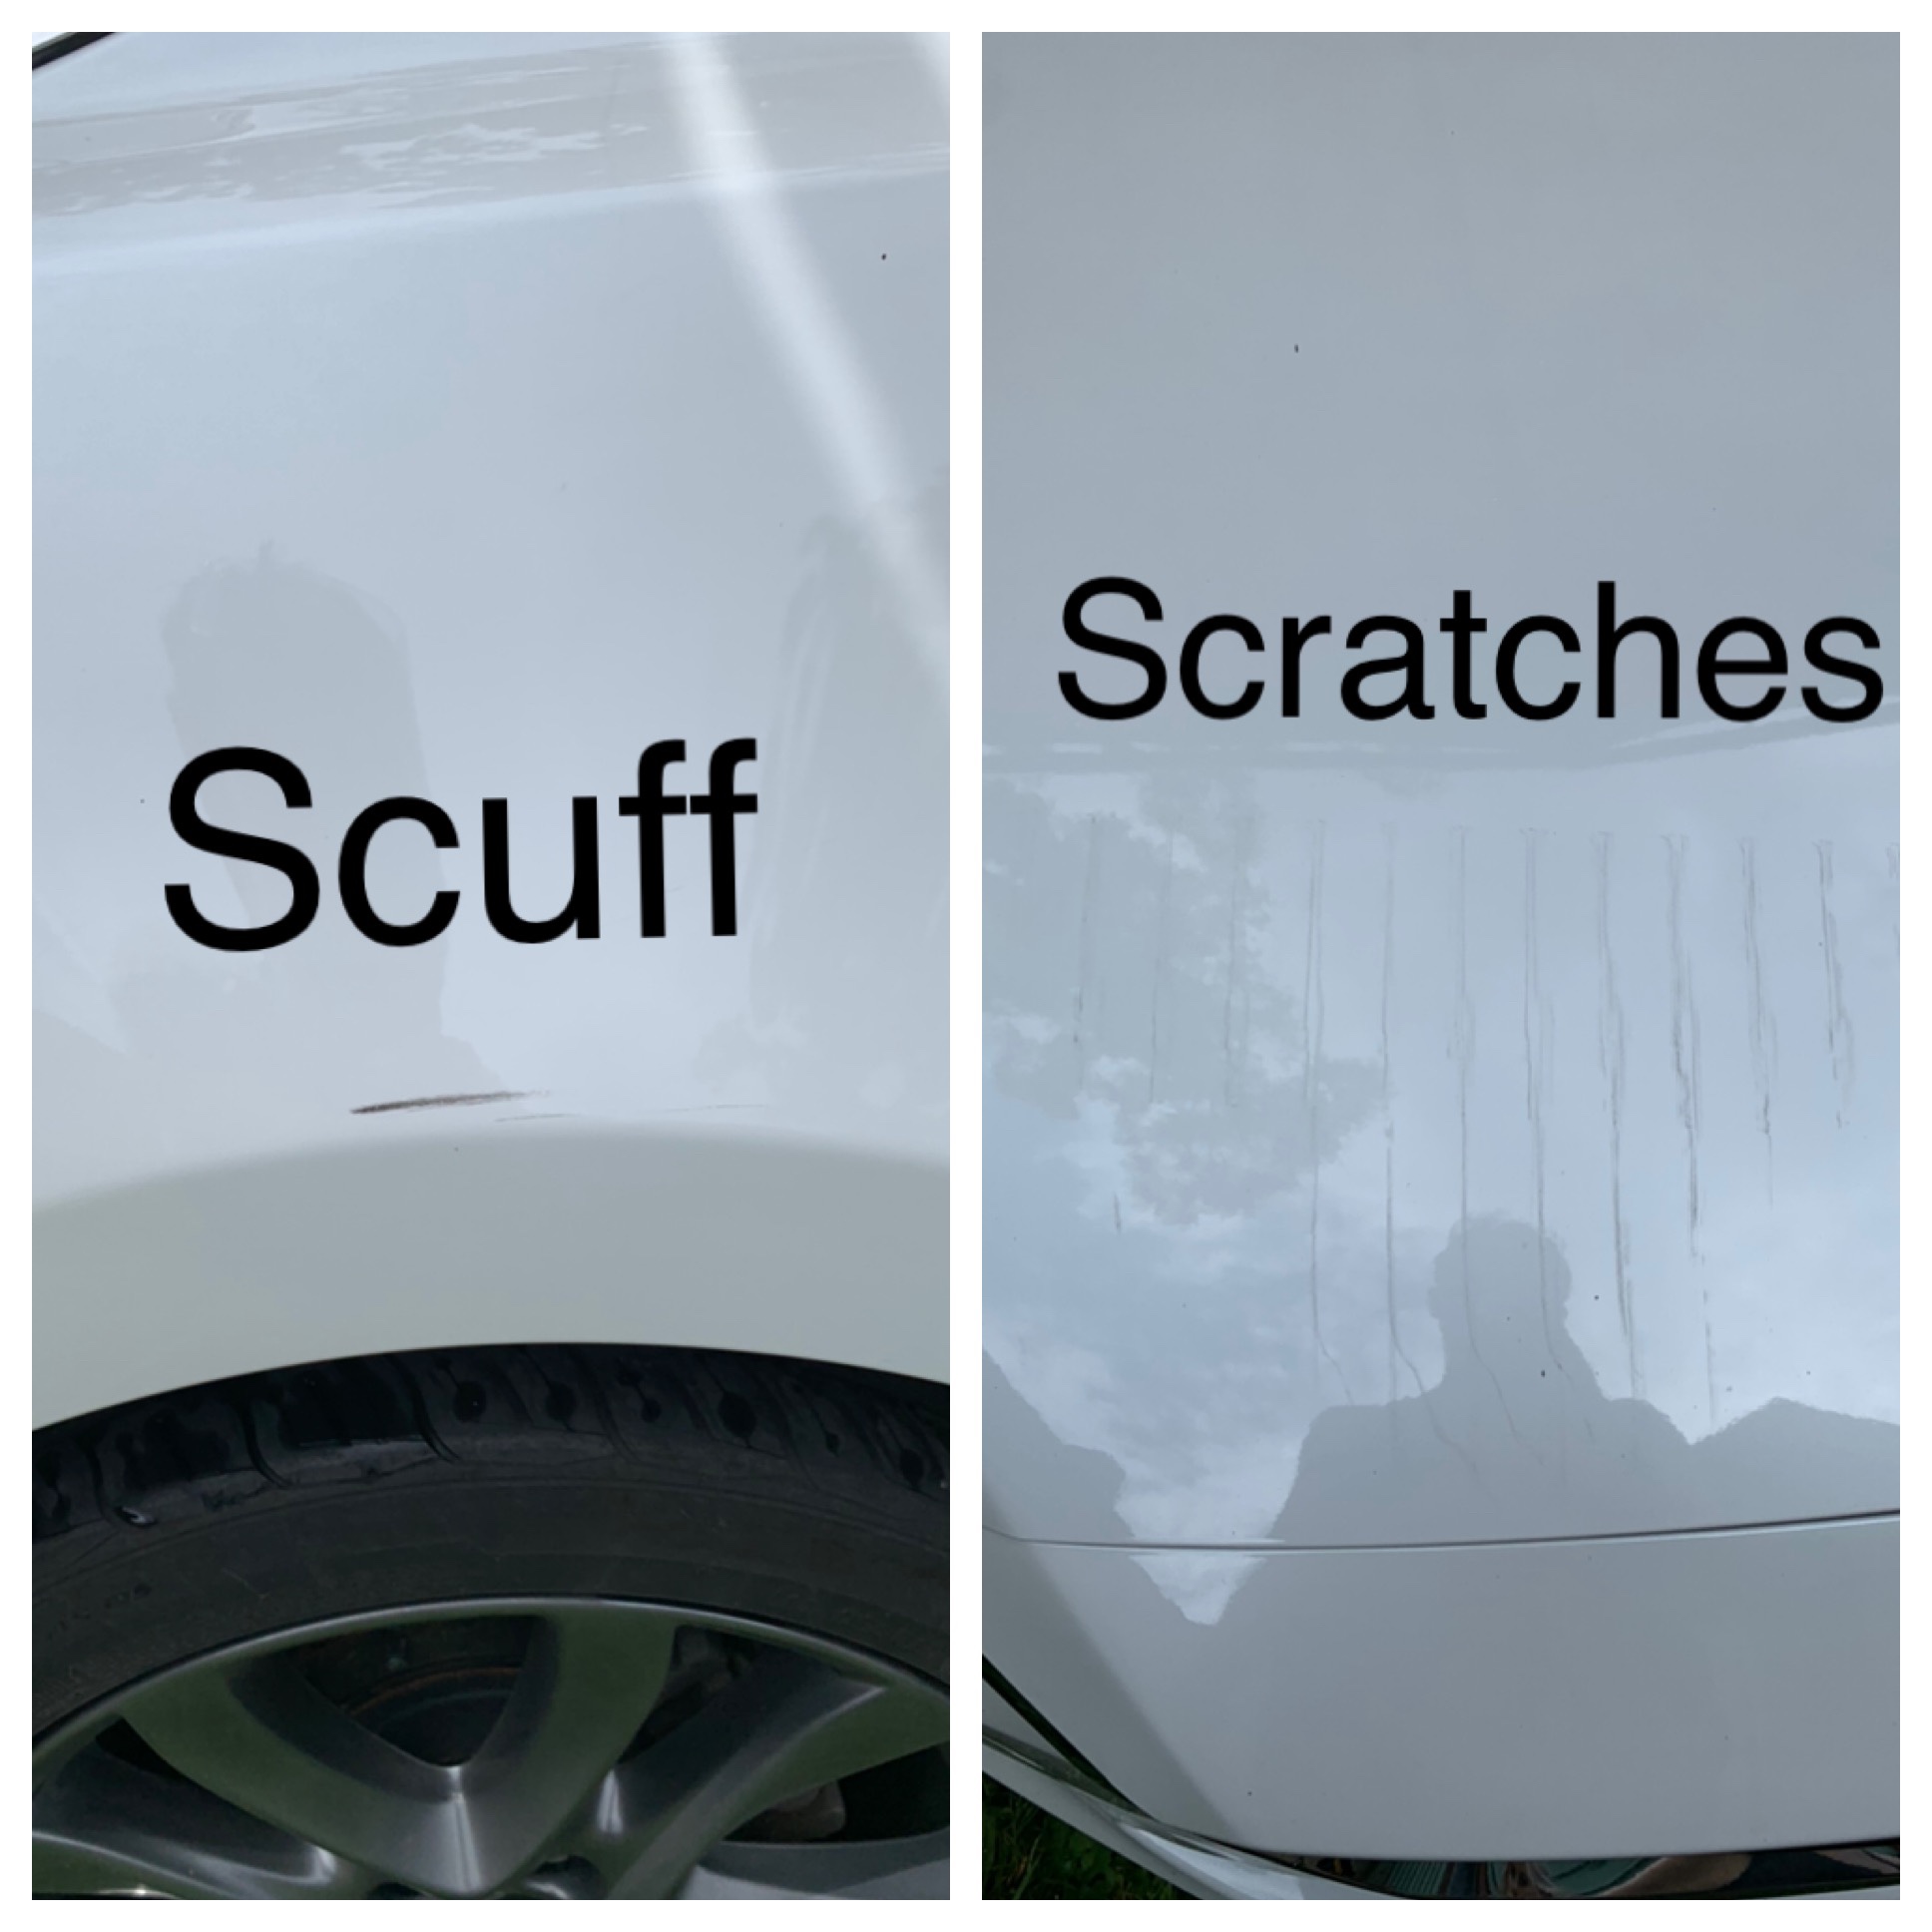 Scratches vs Scuffs - What's The Difference? — Boss Auto Detailing